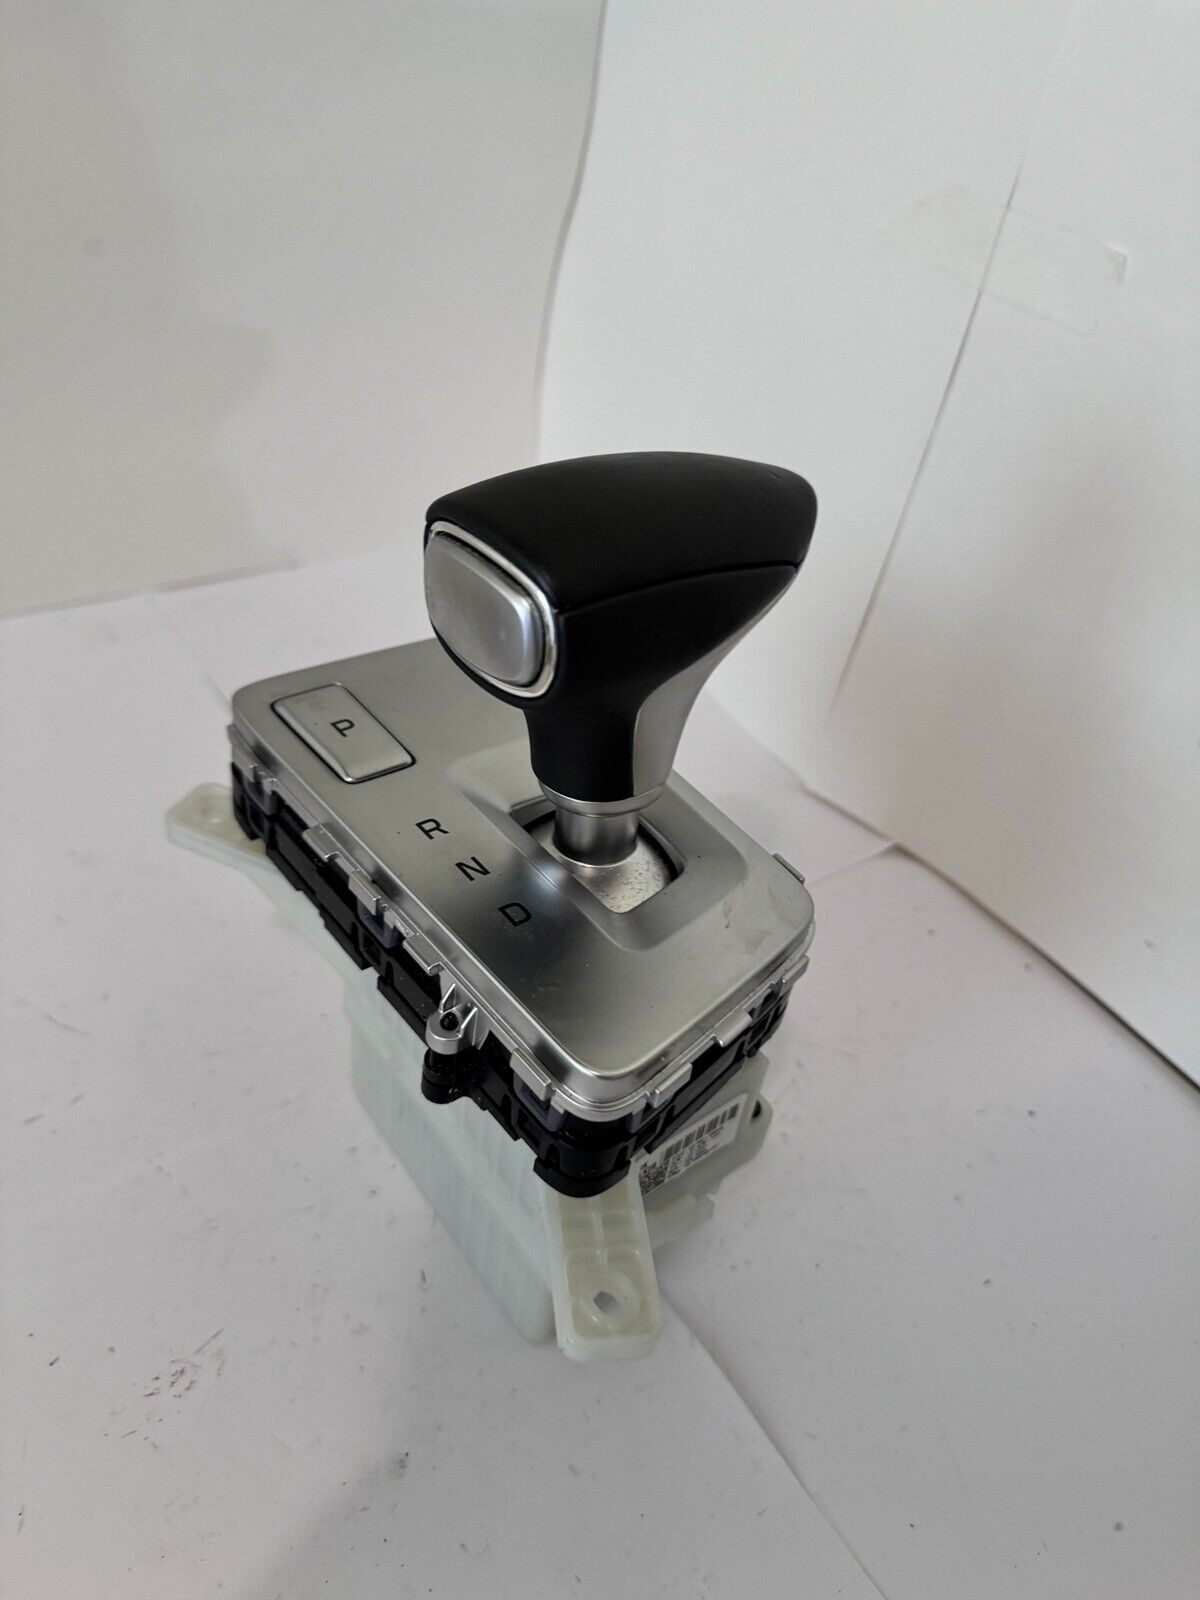 2019 GENESIS G70 CENTER CONSOLE AUTOMATIC SHIFTER ASSEMBLY OEM 